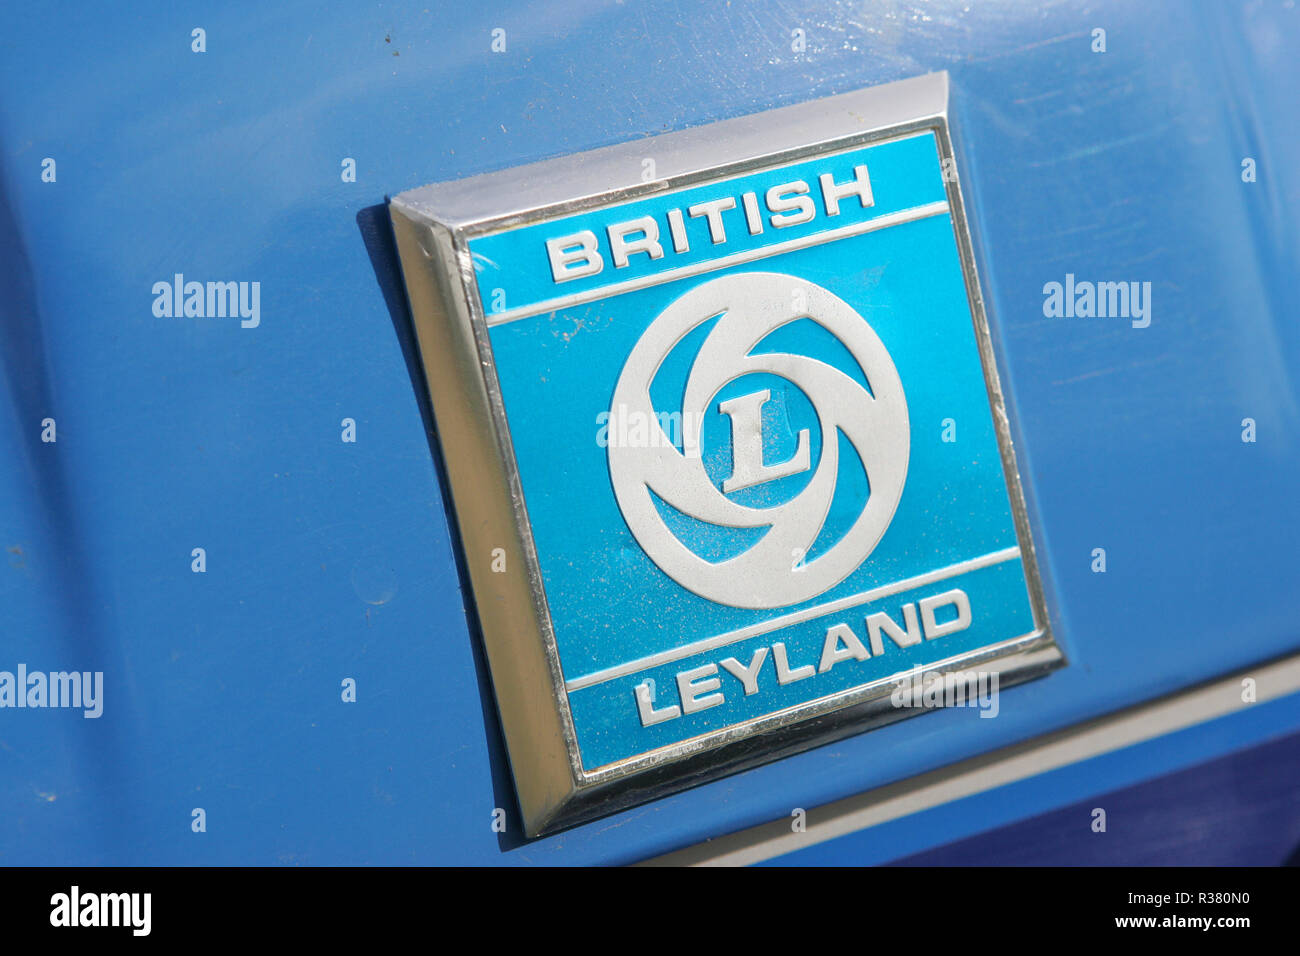 leyland logo high resolution stock photography and images alamy https www alamy com british leyland old tractor and emblem on display at a country fair england uk gb image225754956 html